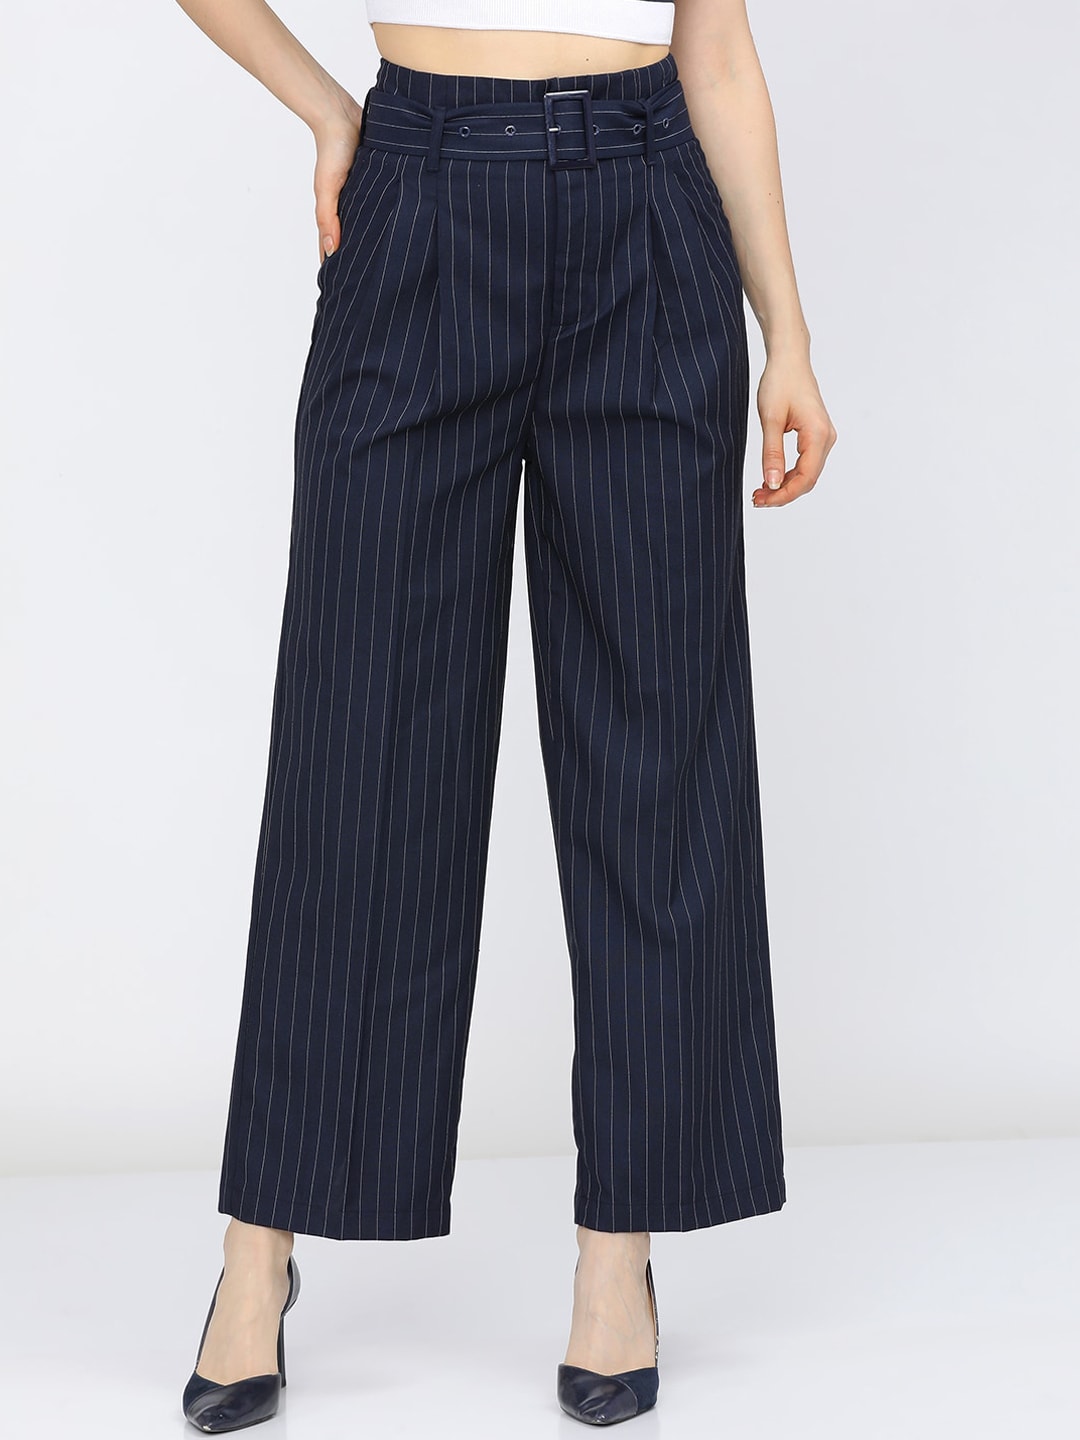 Tokyo Talkies Women Navy Blue Striped Pleated Trousers Price in India